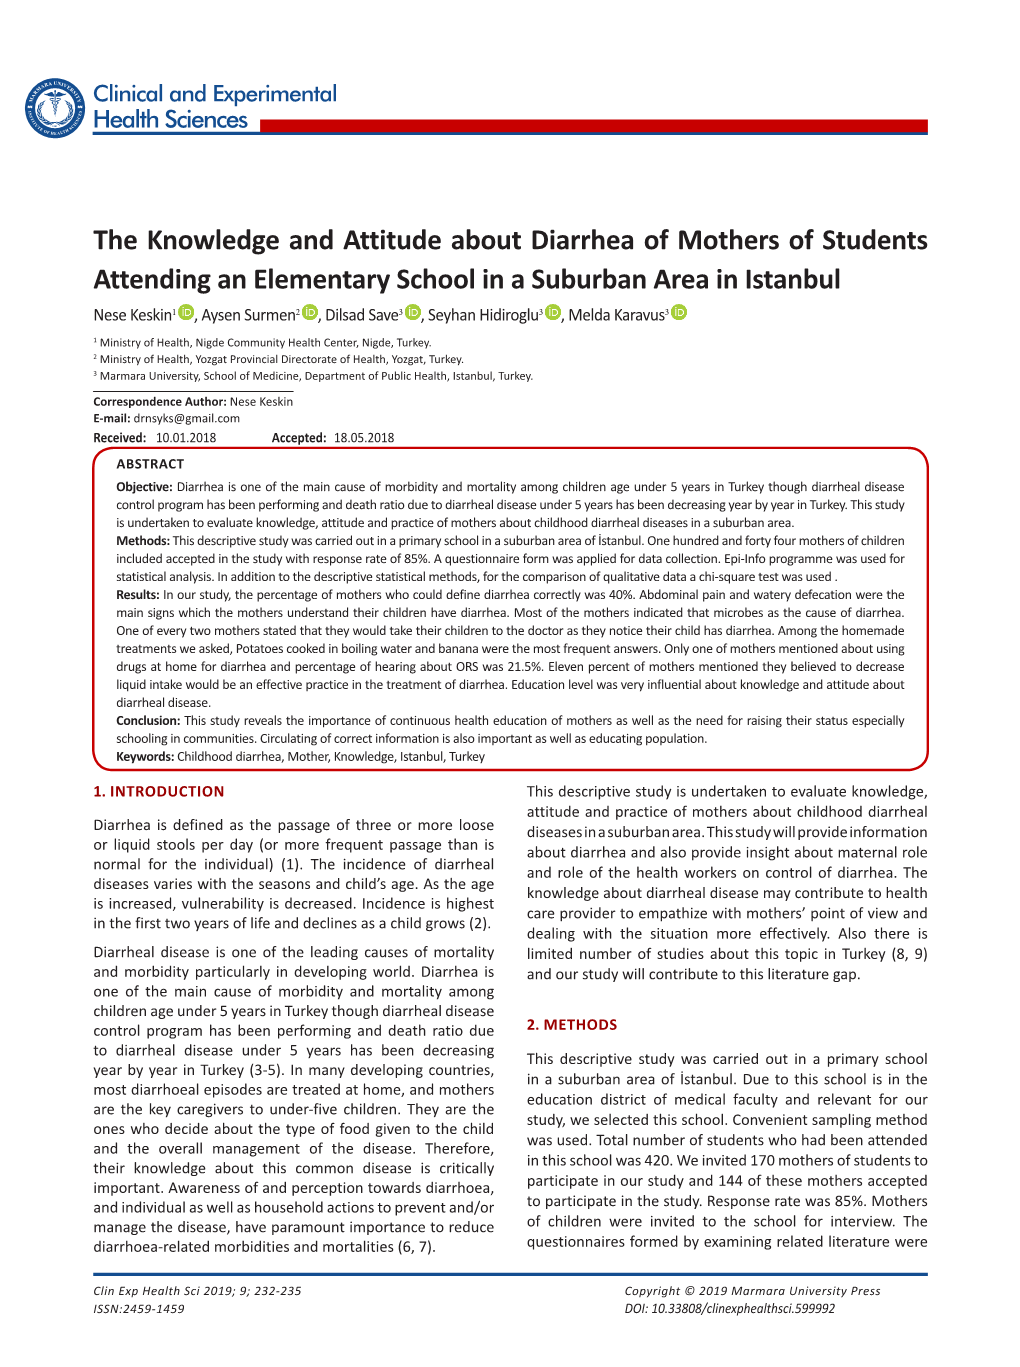 The Knowledge and Attitude About Diarrhea of Mothers of Students